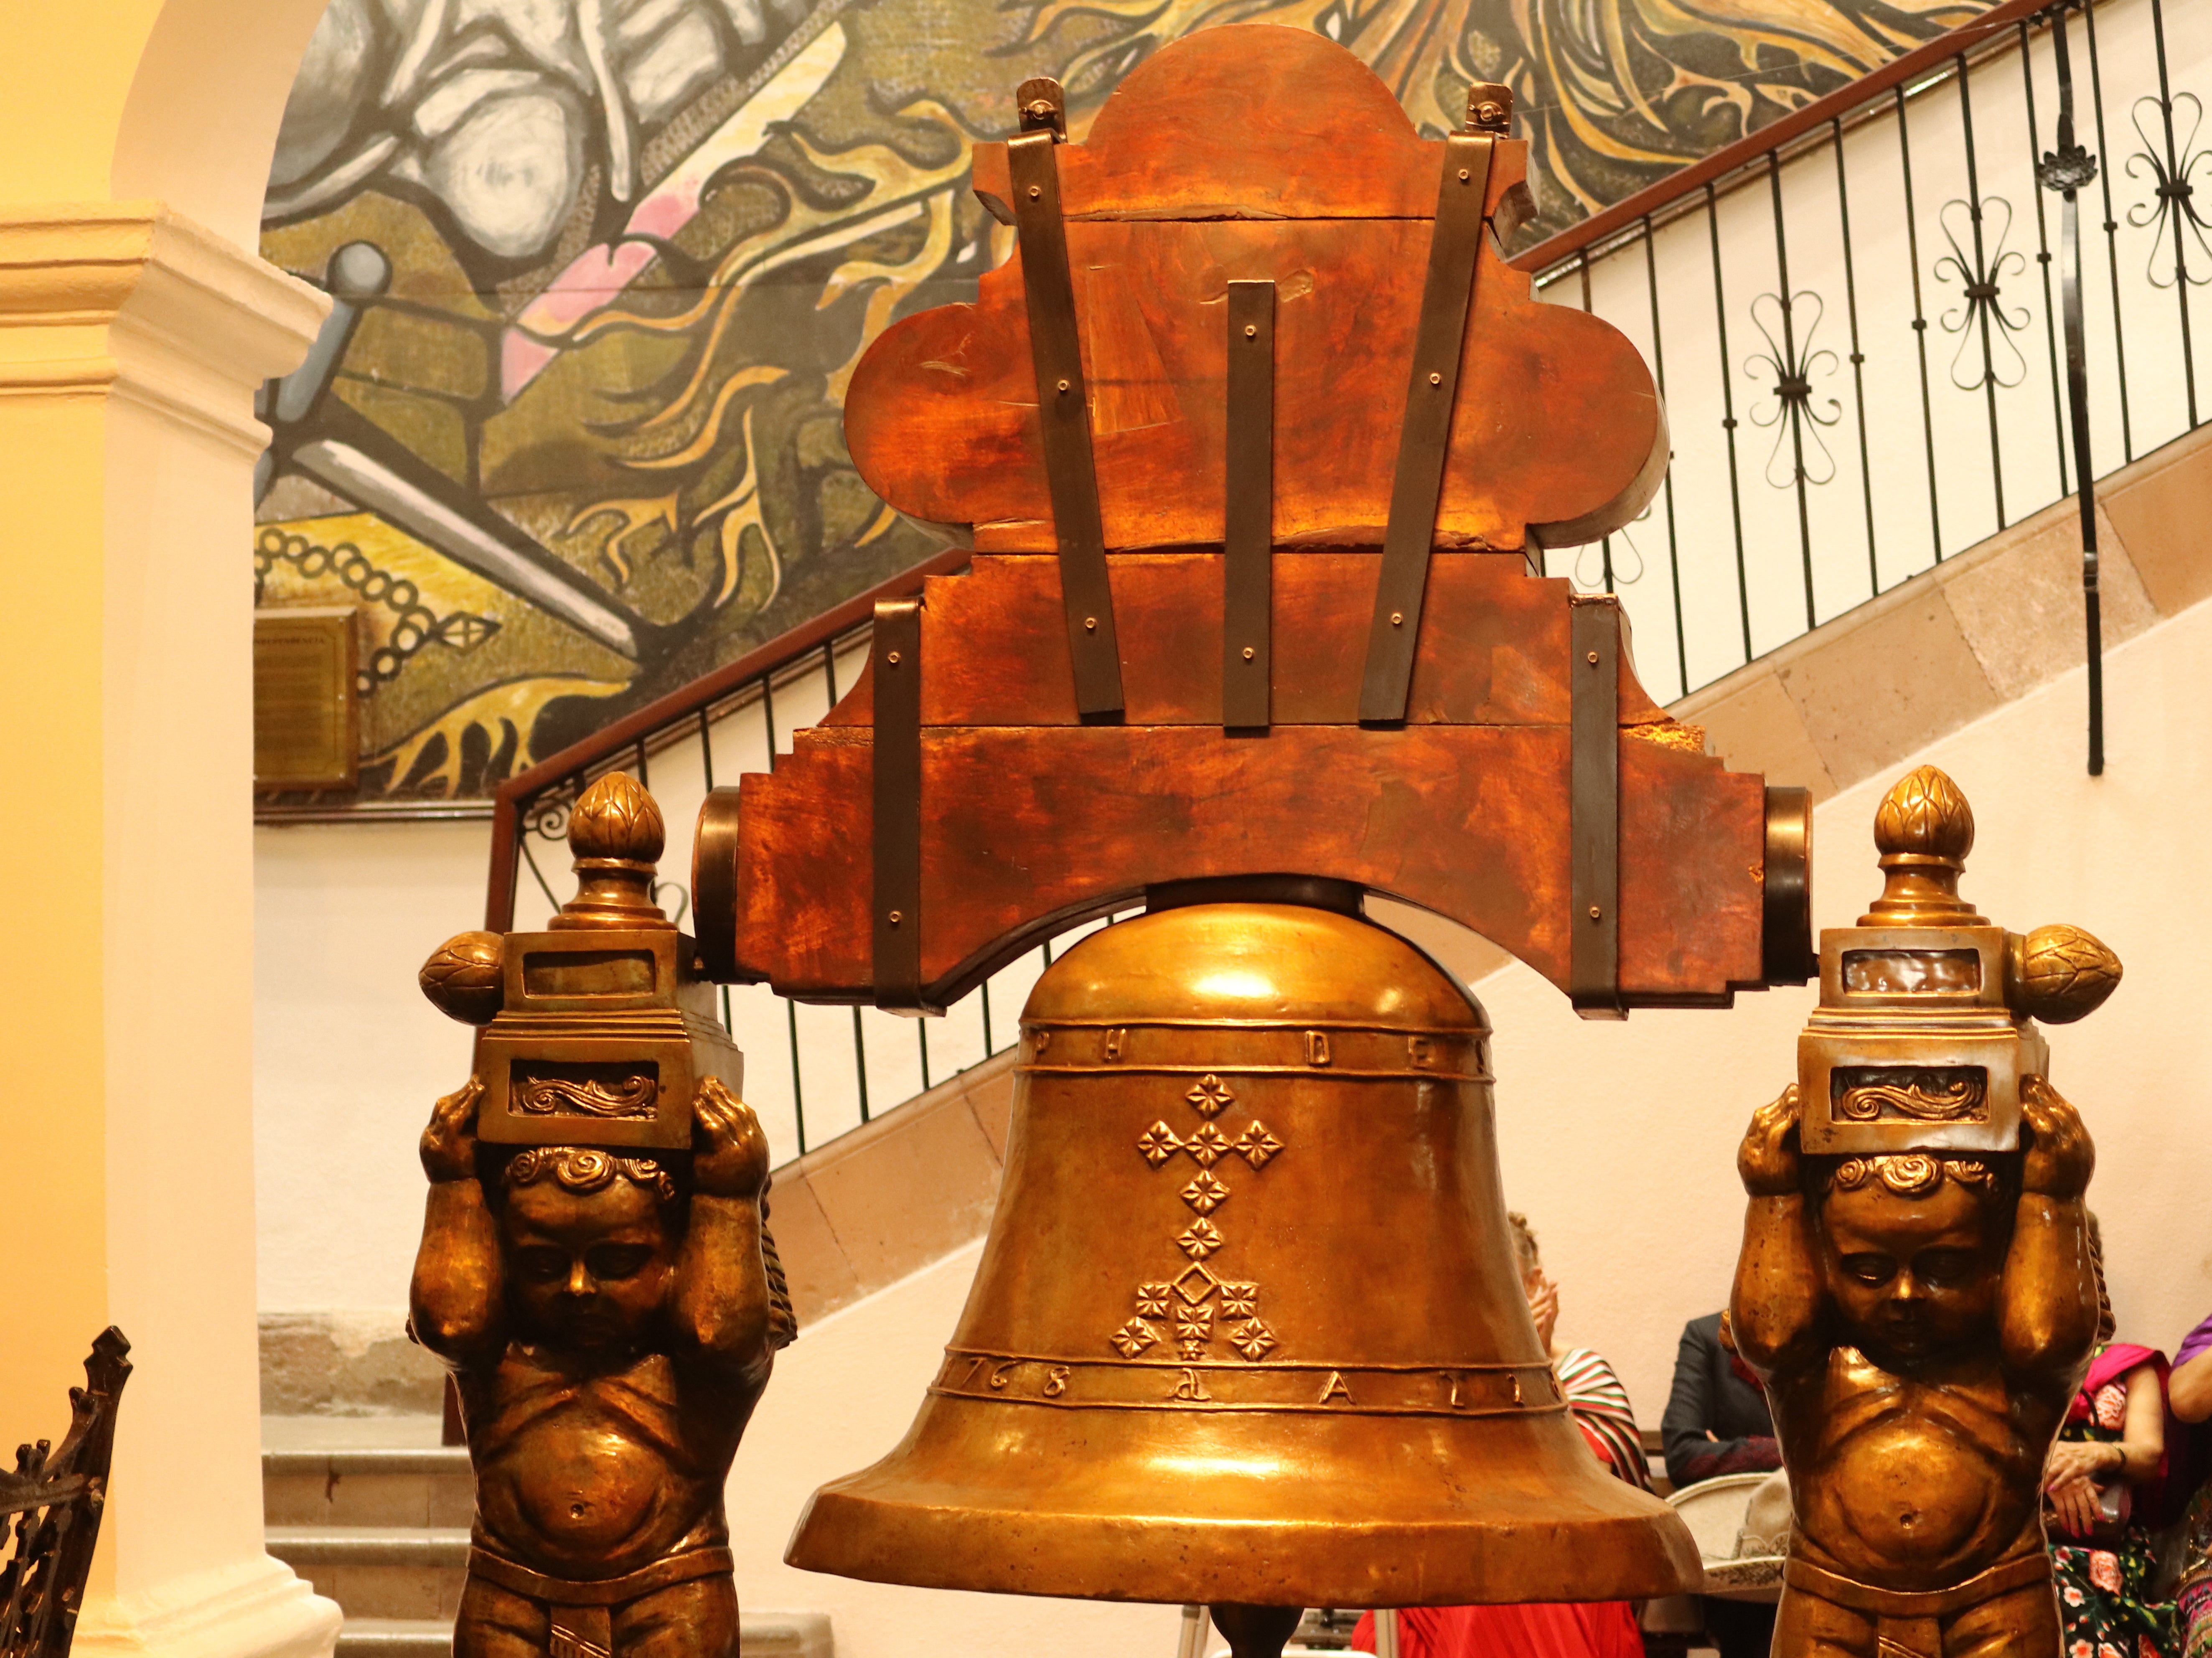 A replica of the ‘independence bell’ at Casa Mariano Abasolo in the city of Dolores Hidalgo, Guanajuato